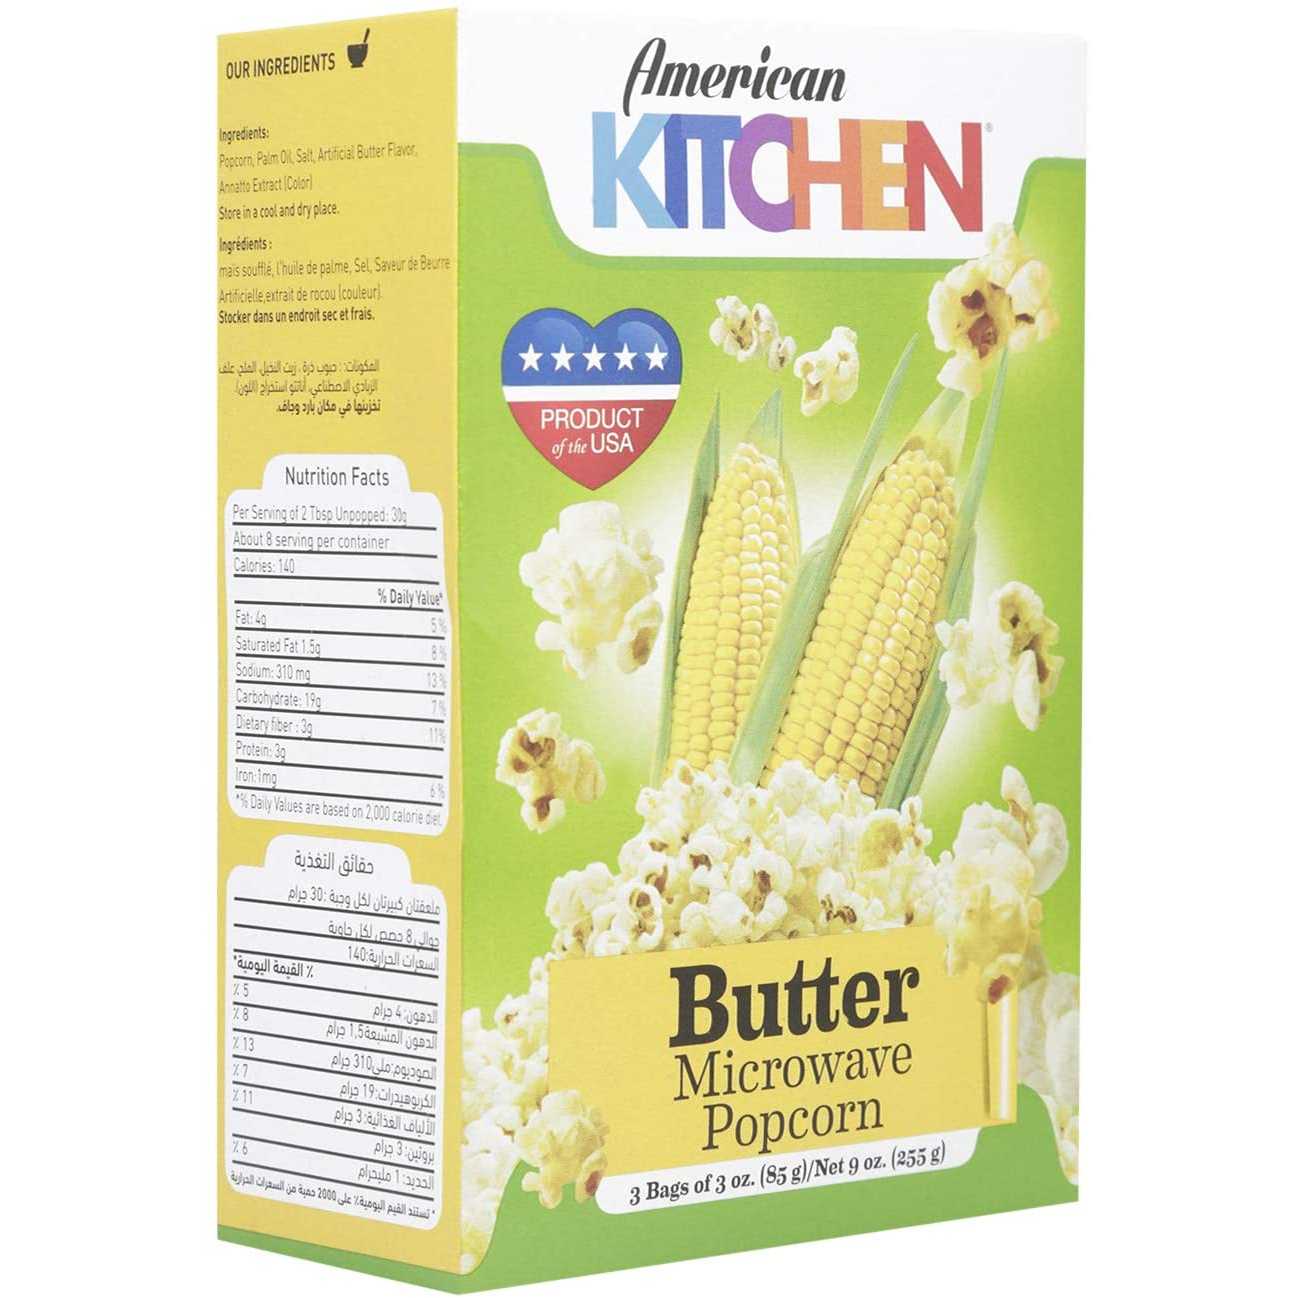 American Kitchen Butter Microwave Popcorn, 85g - Pack of 3